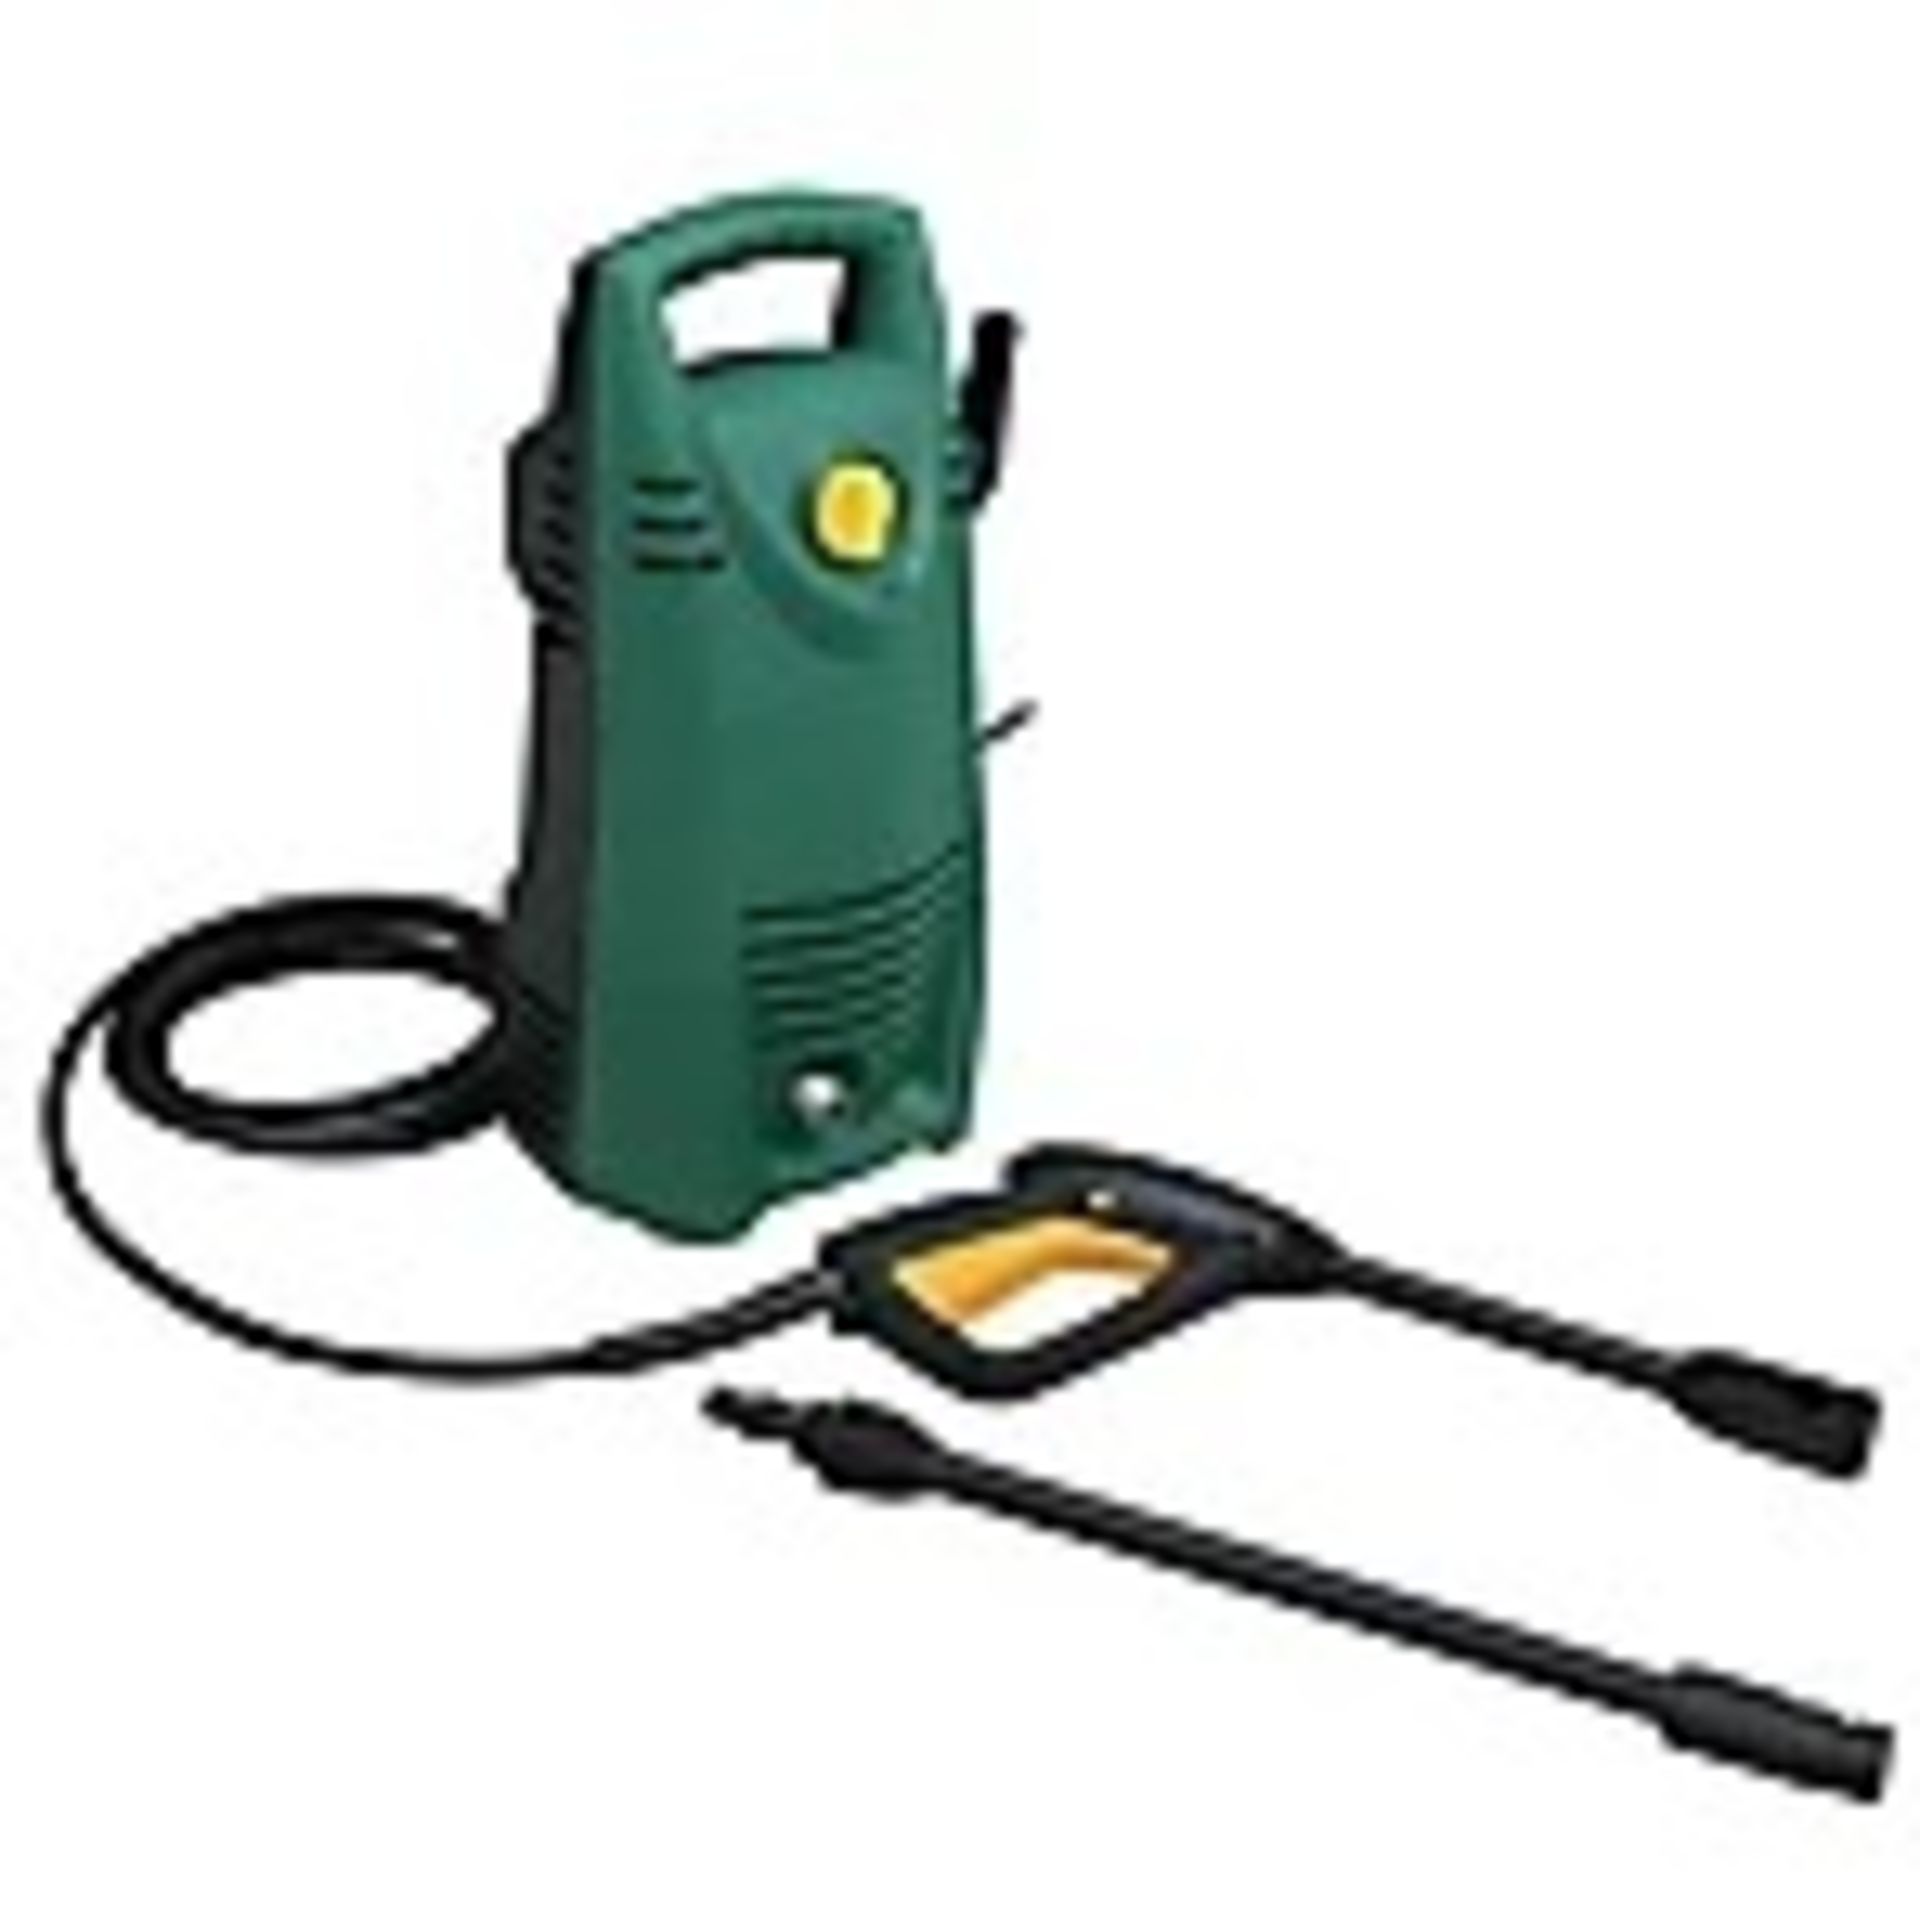 Auto-stop Corded Pressure Washer 1.4kW - ER40